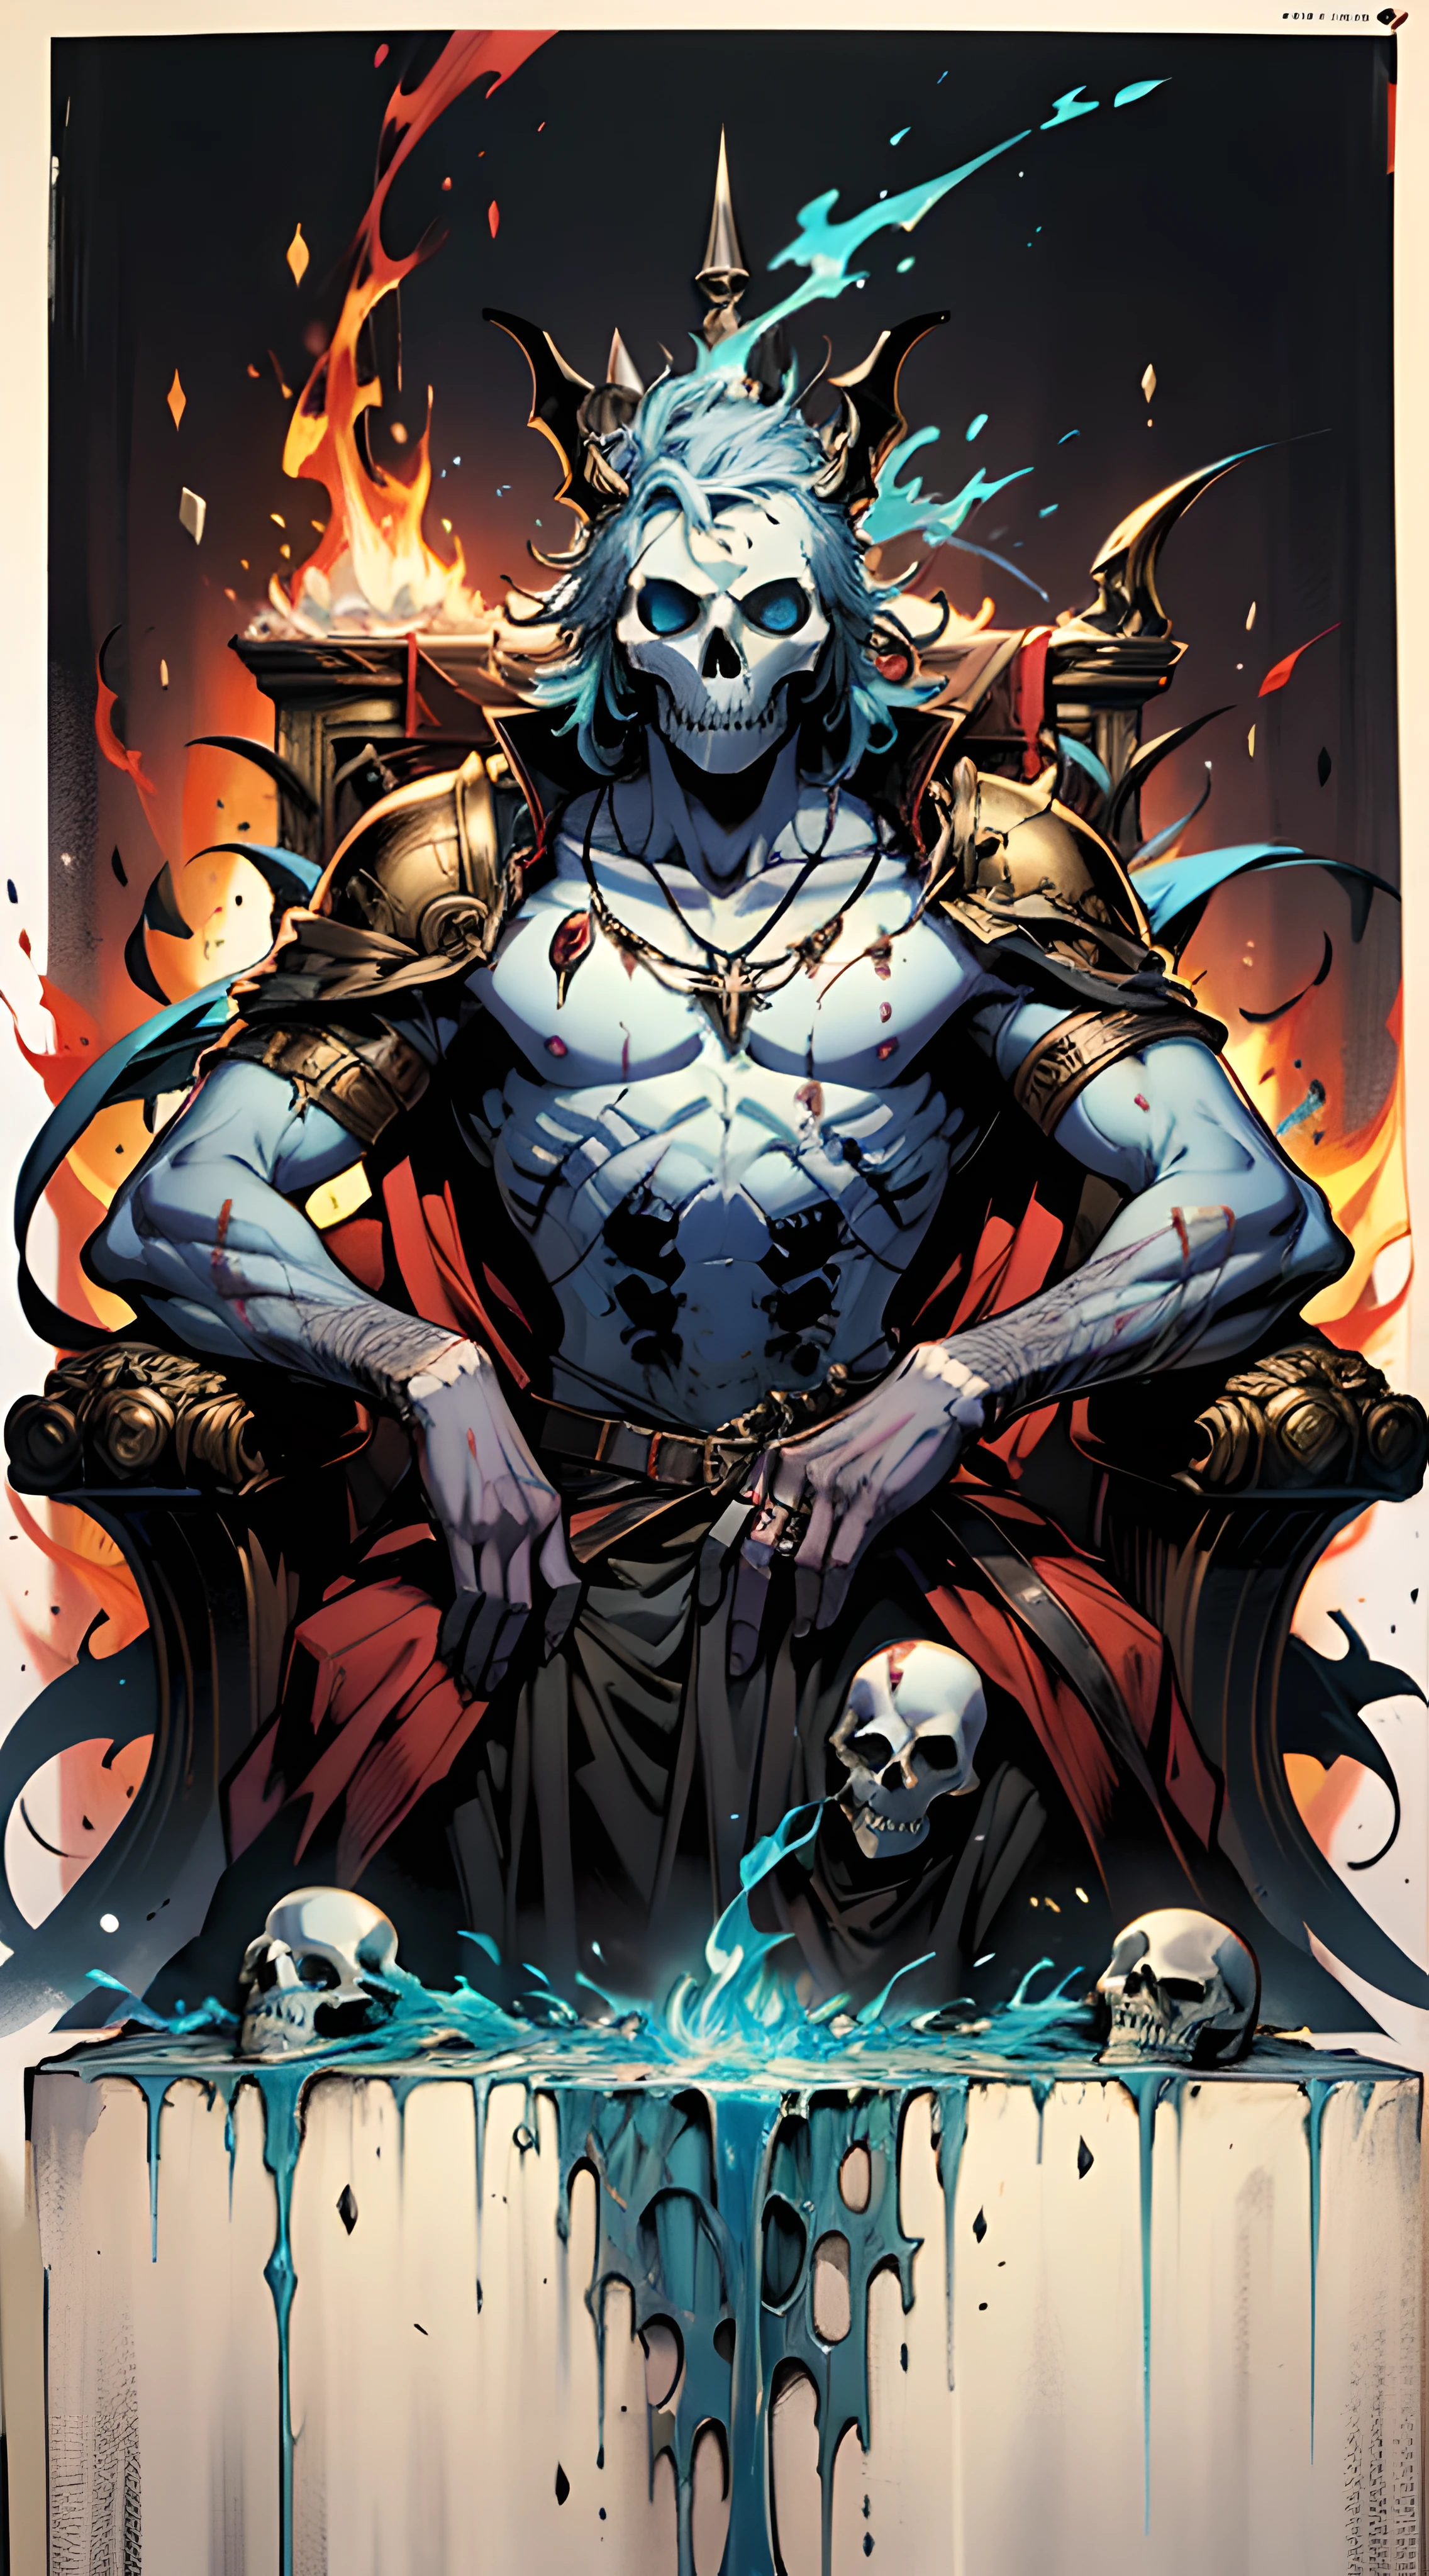 An anime poster featuring a dark skull as the protagonist， Evil and dangerous， Intricate and delicate armor on the upper body，Skull jewelry and necklace decoration， Lean figure，Fierce and empty flame eyes，Holding a blue flame sword，sitting on an royal throne，A large amount of blue fire erupted from the throne，Flow effects， fundo vermelho，Visual impact， The art of demons， Real human skeletons，Comic book style art， Light red and light black，action painting